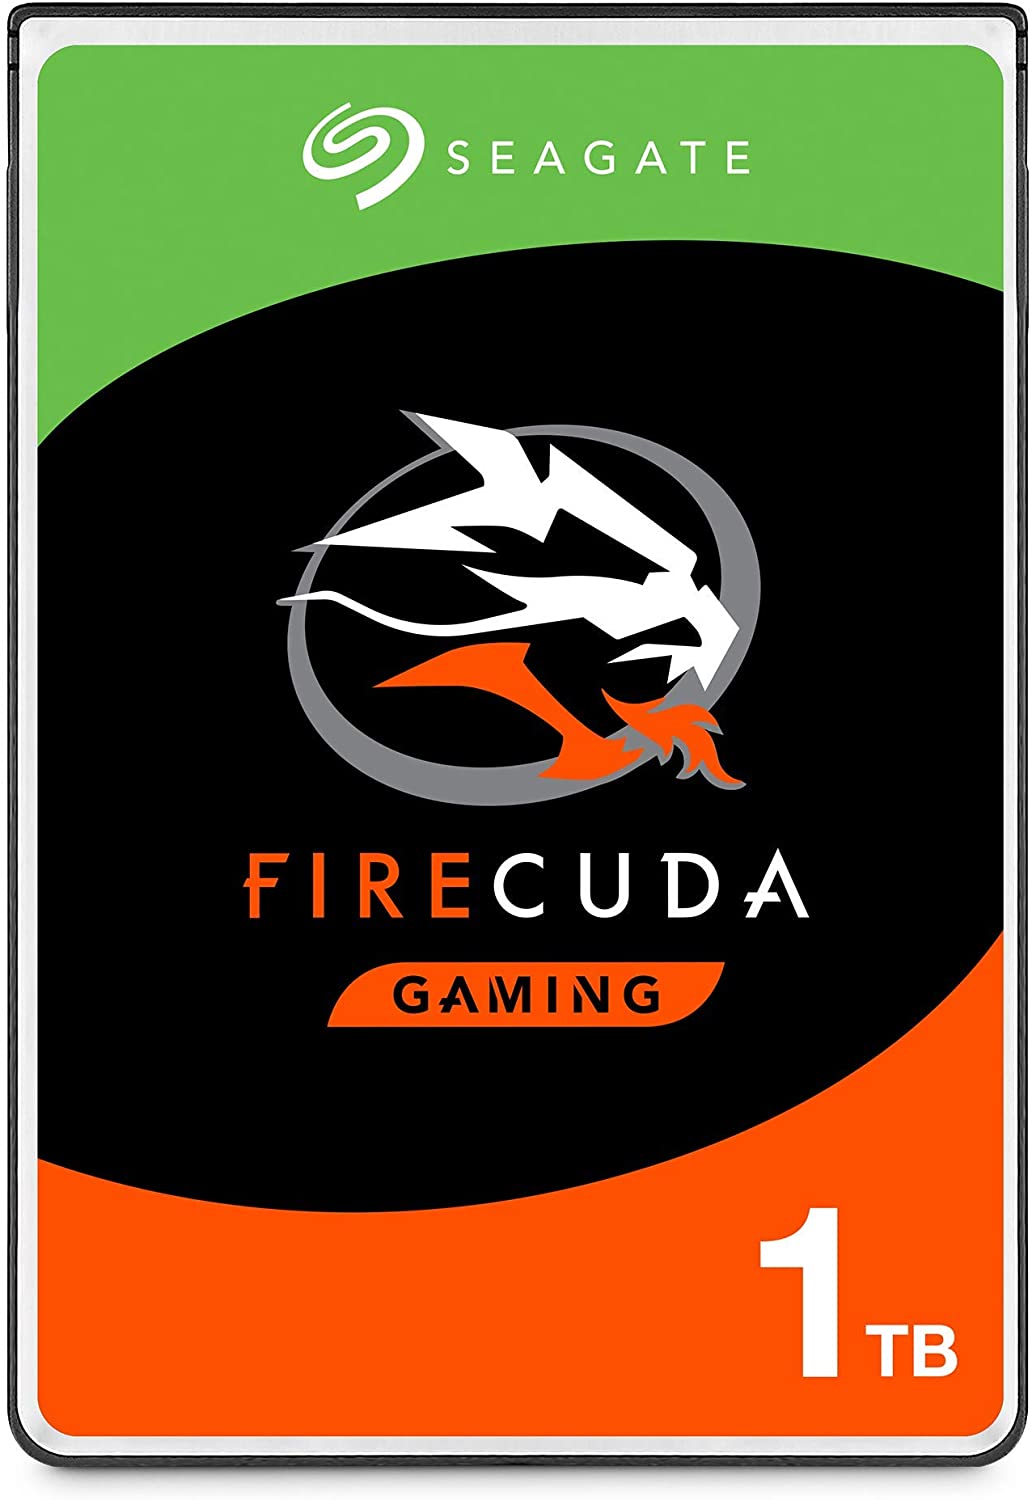 Seagate FireCuda 1TB Solid State Hybrid Drive Performance SSHD – 2.5 Inch SATA 6GB/s Flash Accelerated for Gaming PC Laptop – Frustration Free Packaging (ST1000LX015)